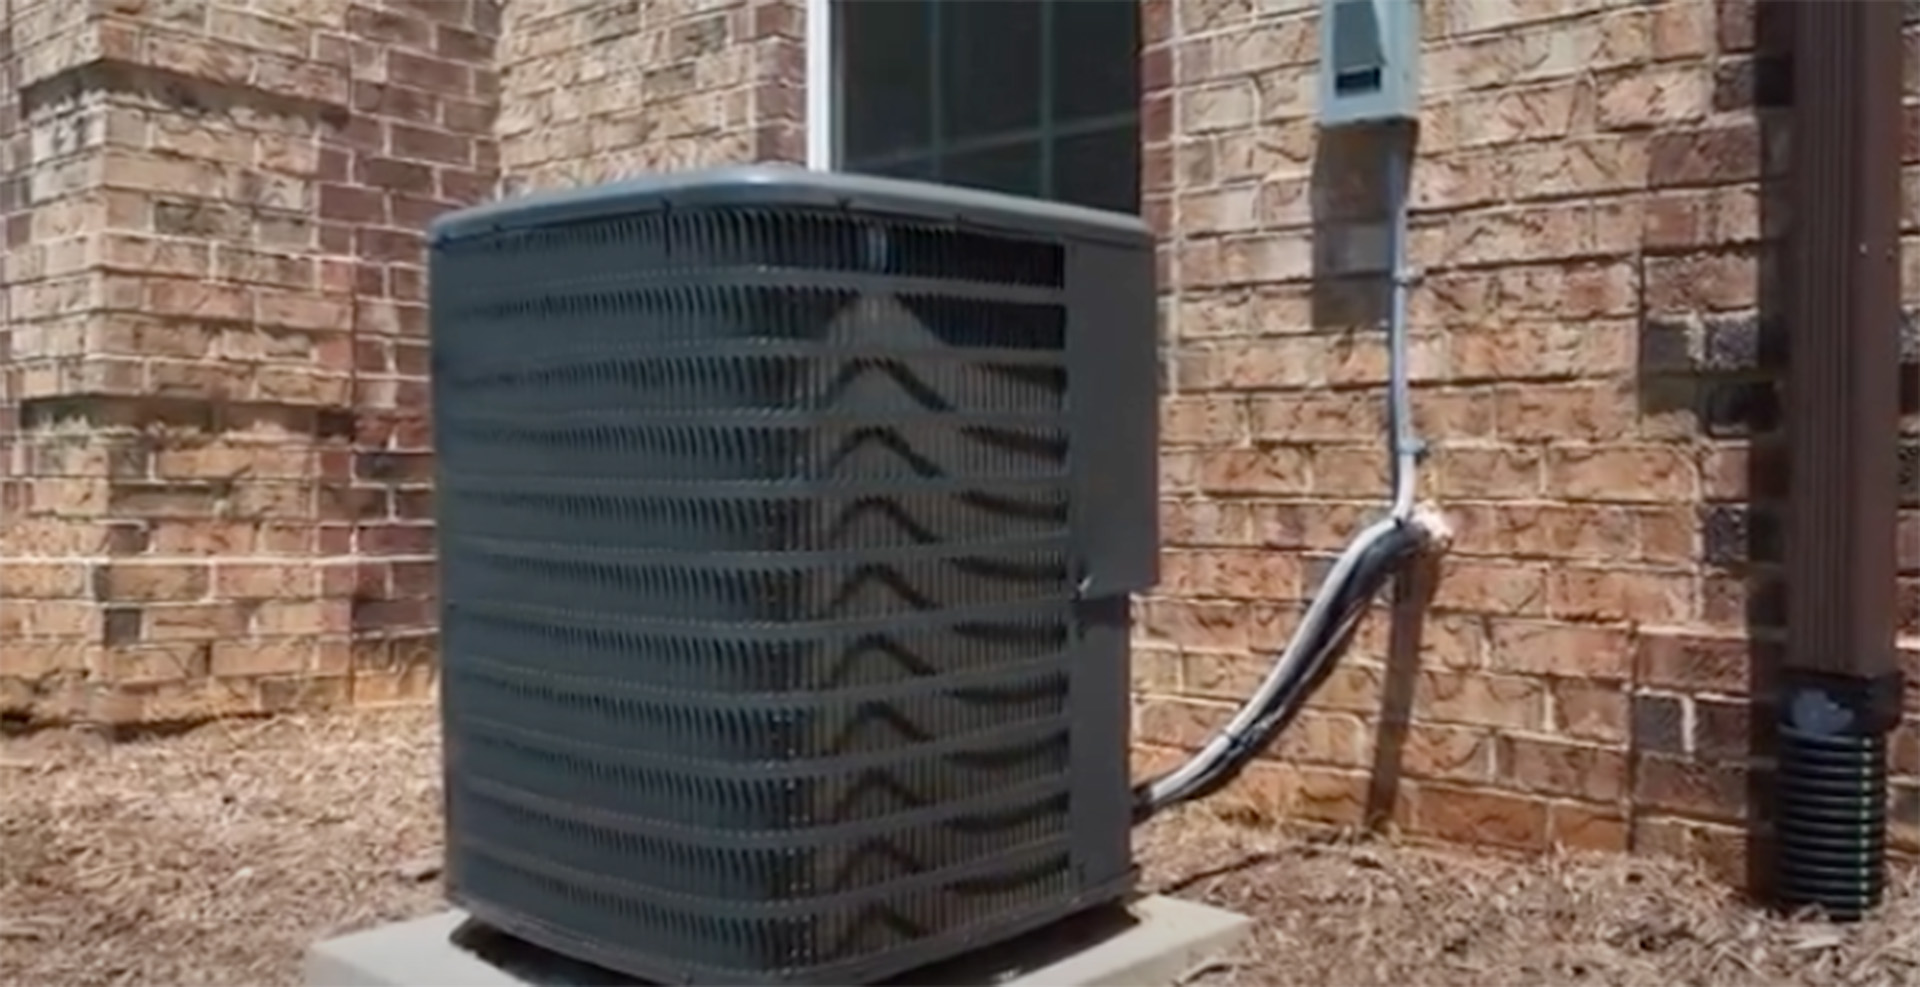 Repair or Replace  Expert Advice on Your Air Conditioners Lifespan